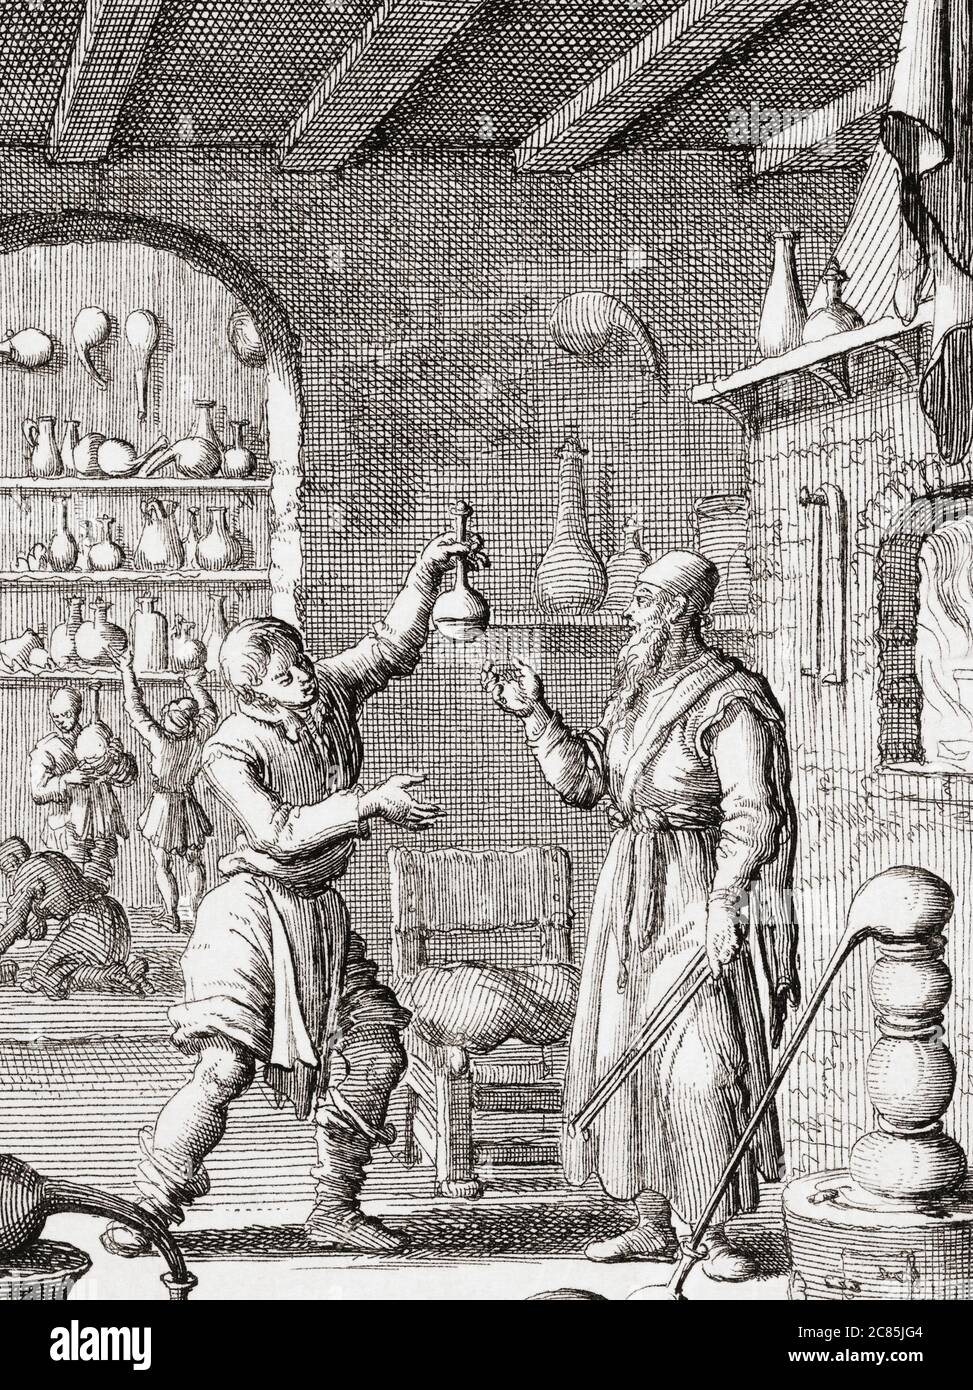 17th century chemists at work in their laboratory.  After a work by Dutch illustrator and engraver Jan Luyken. Stock Photo